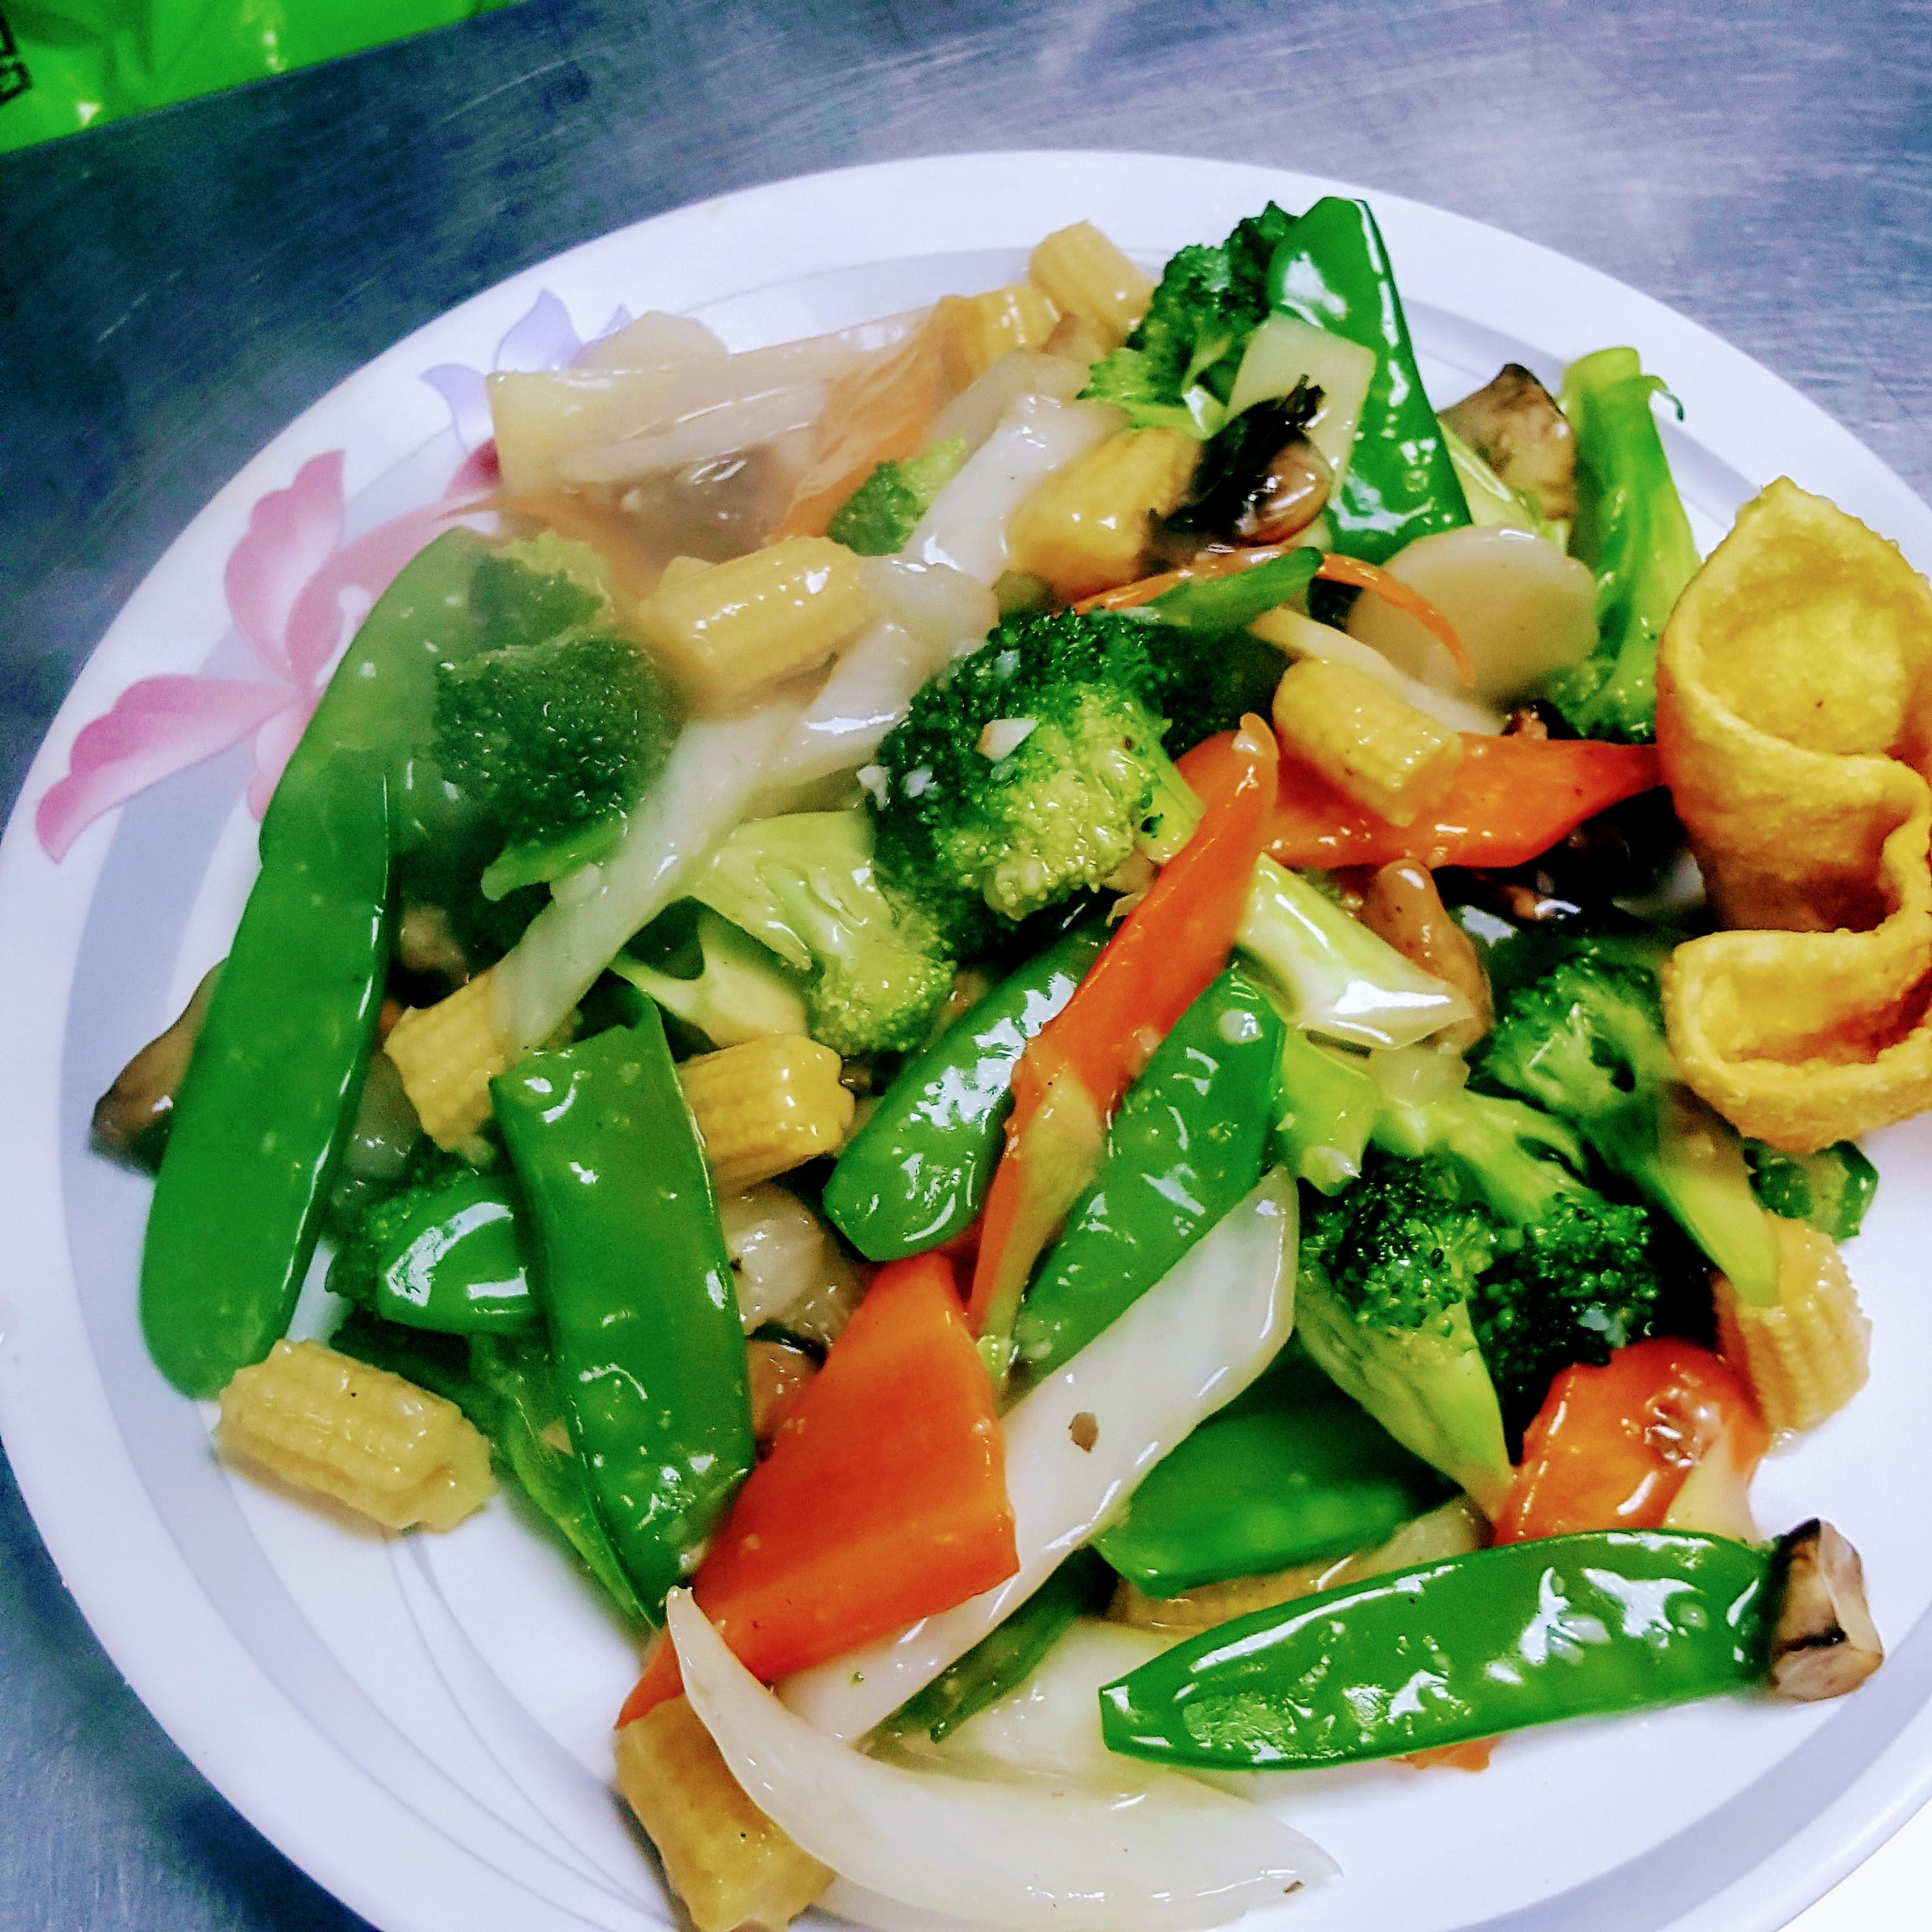 73. Chinese Mixed Vegetables